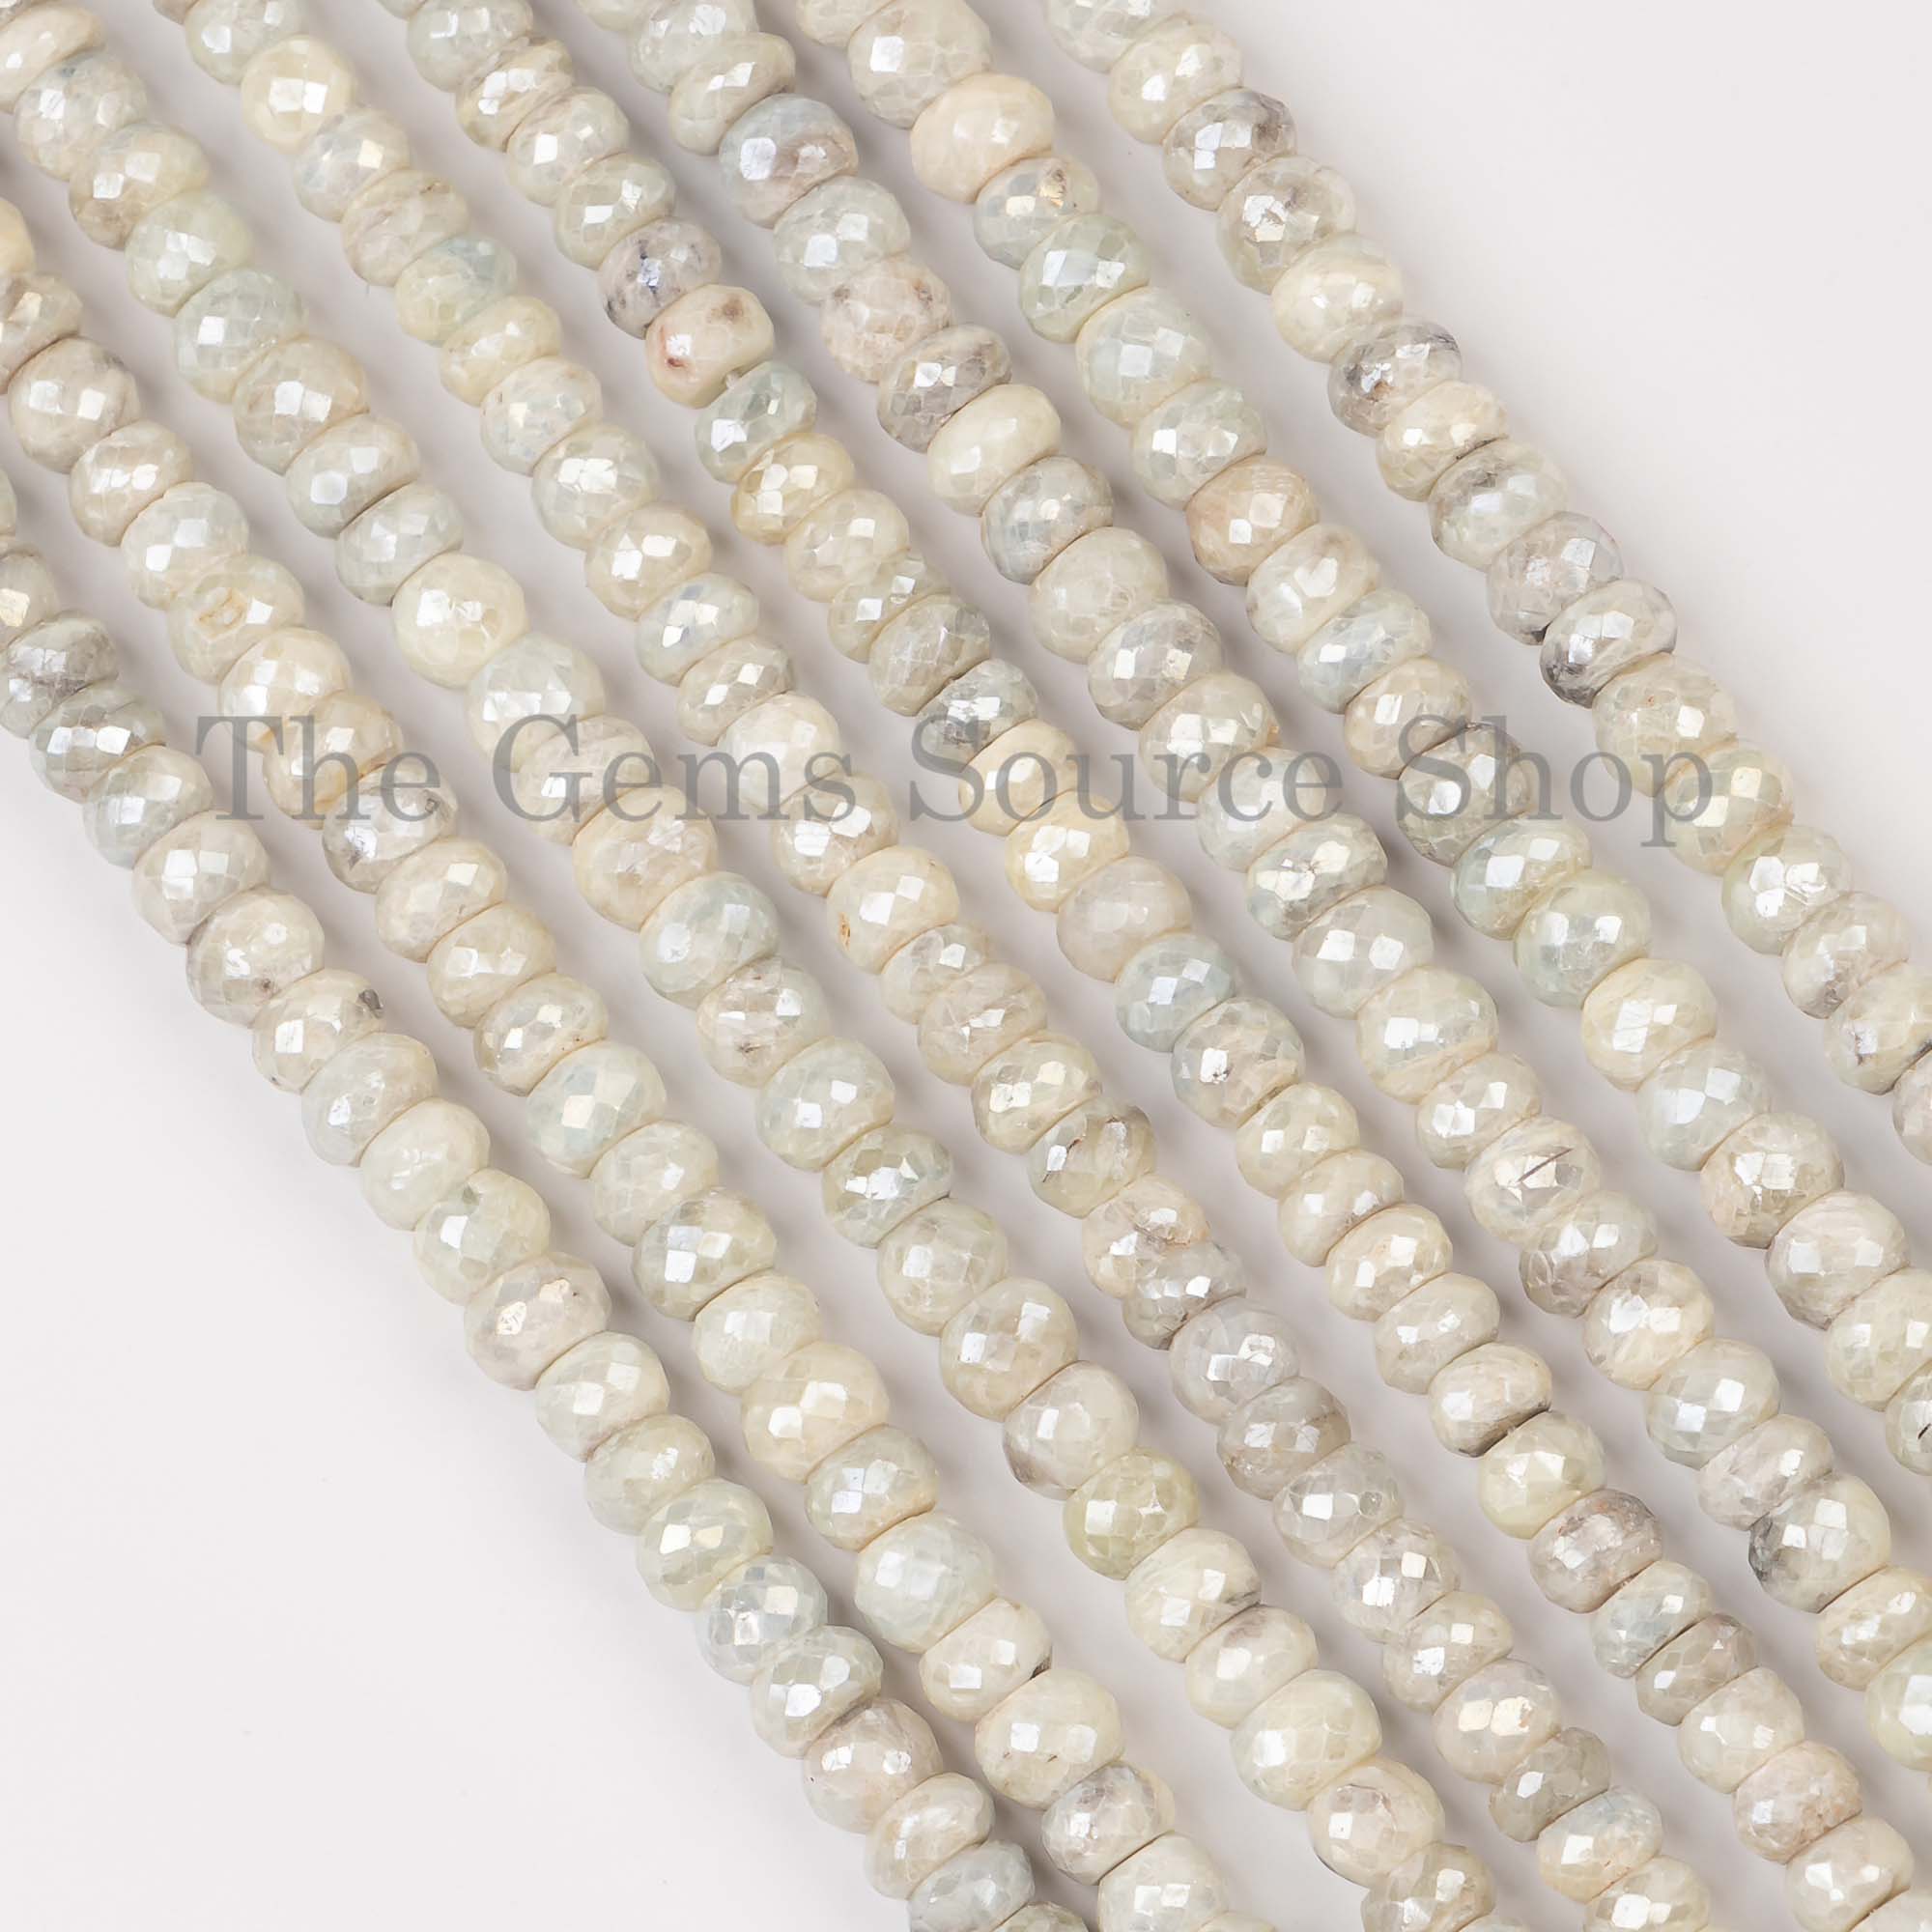 Silverite Coated Sapphire Faceted Rondelle Beads, Coated Sapphire Rondelle, Sapphire Faceted Beads